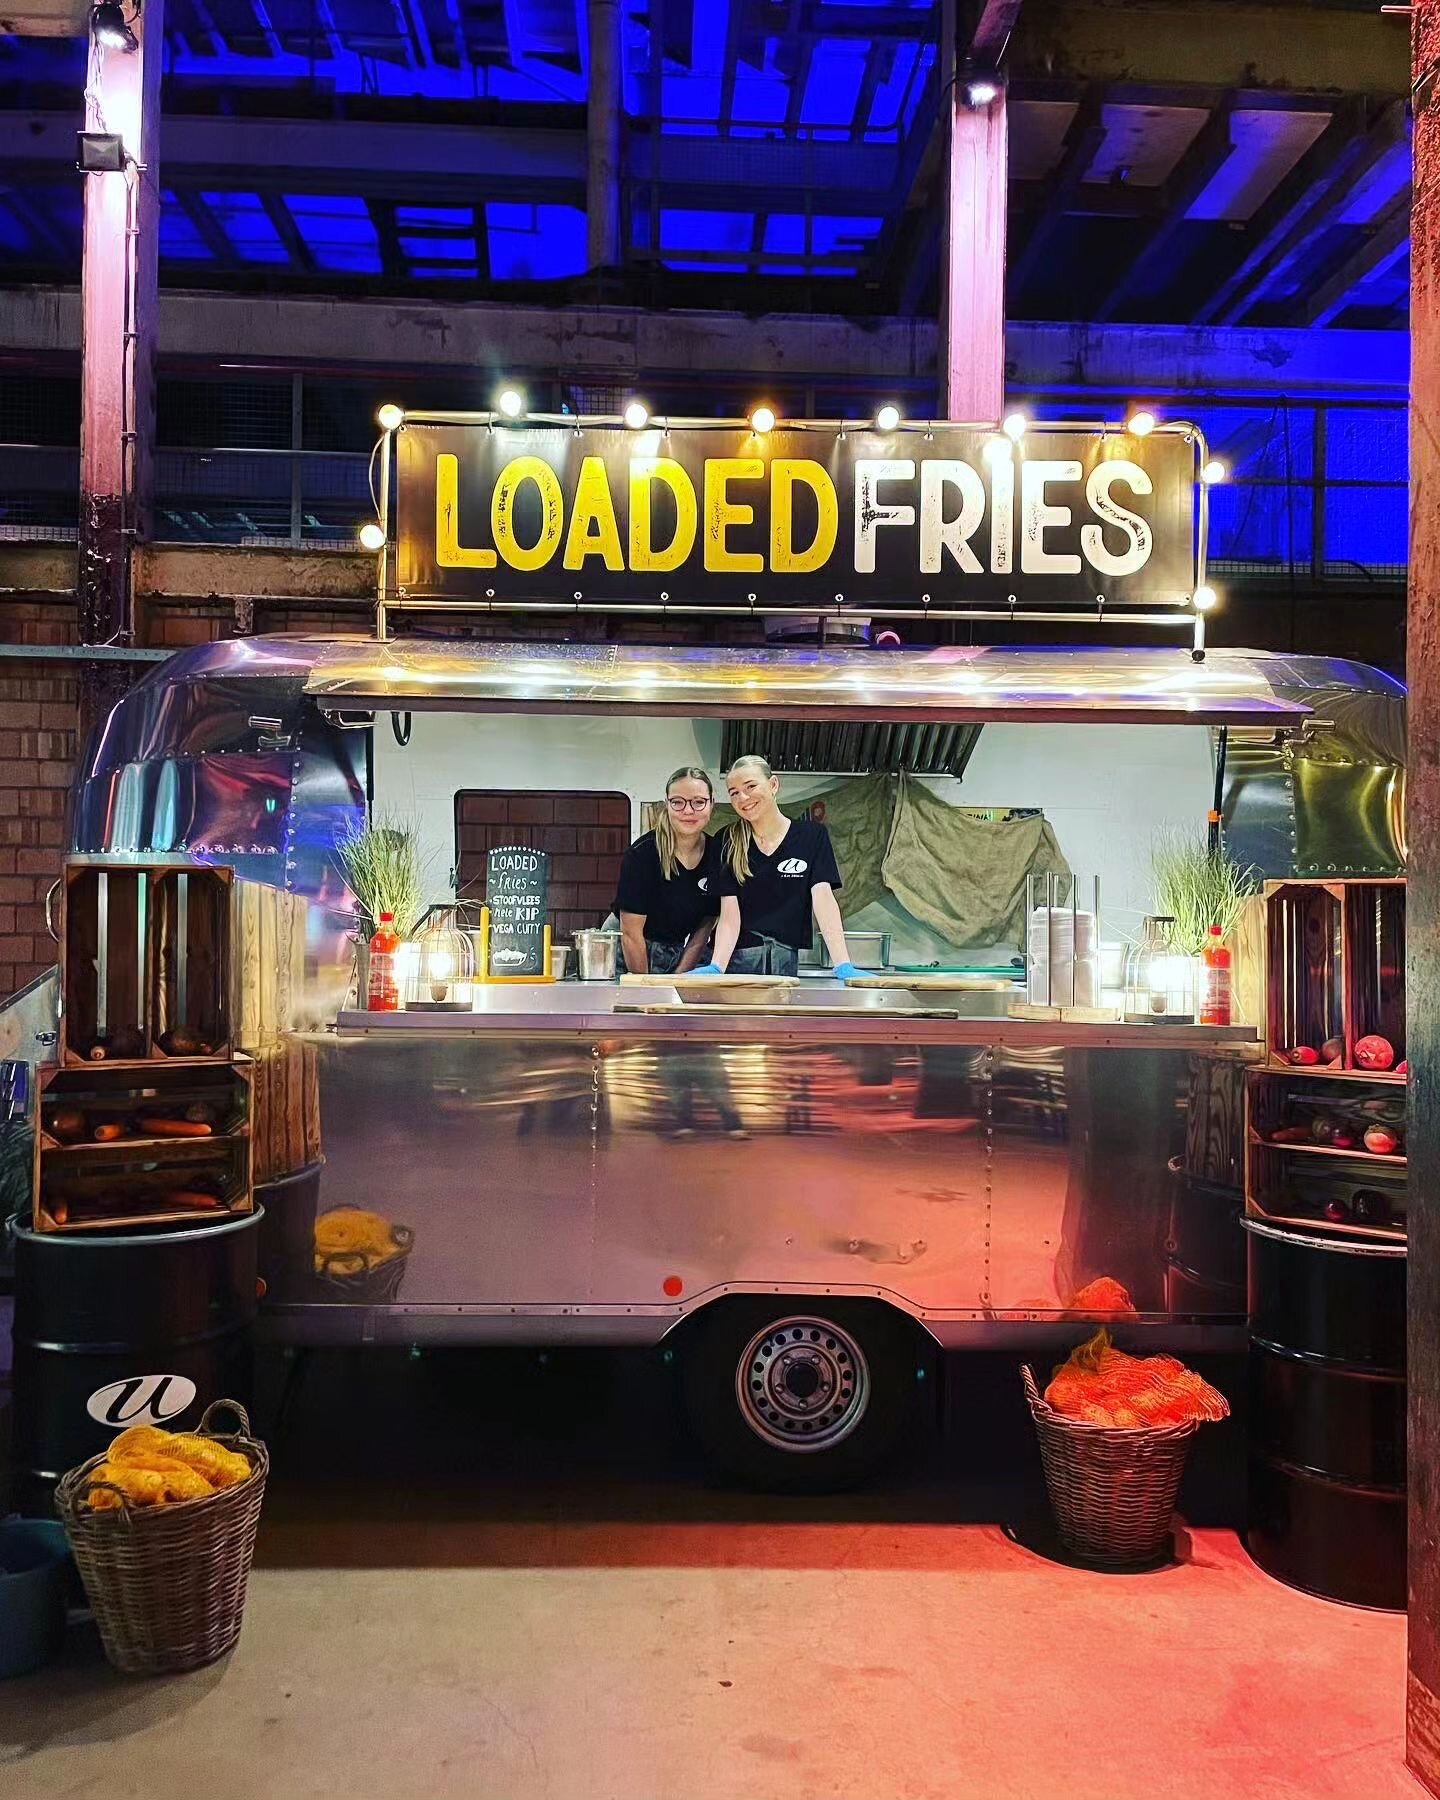 'Do you want any fries with that?' One of @unitcatering #revivaltrailers looking great with some decor🍟🍟 Thanks again guys for the photo! Happy trading🙌🎉

#revival #revivaltrailer #revivaltrailers #airstream #handmade #madeintheuk #builtintheuk #